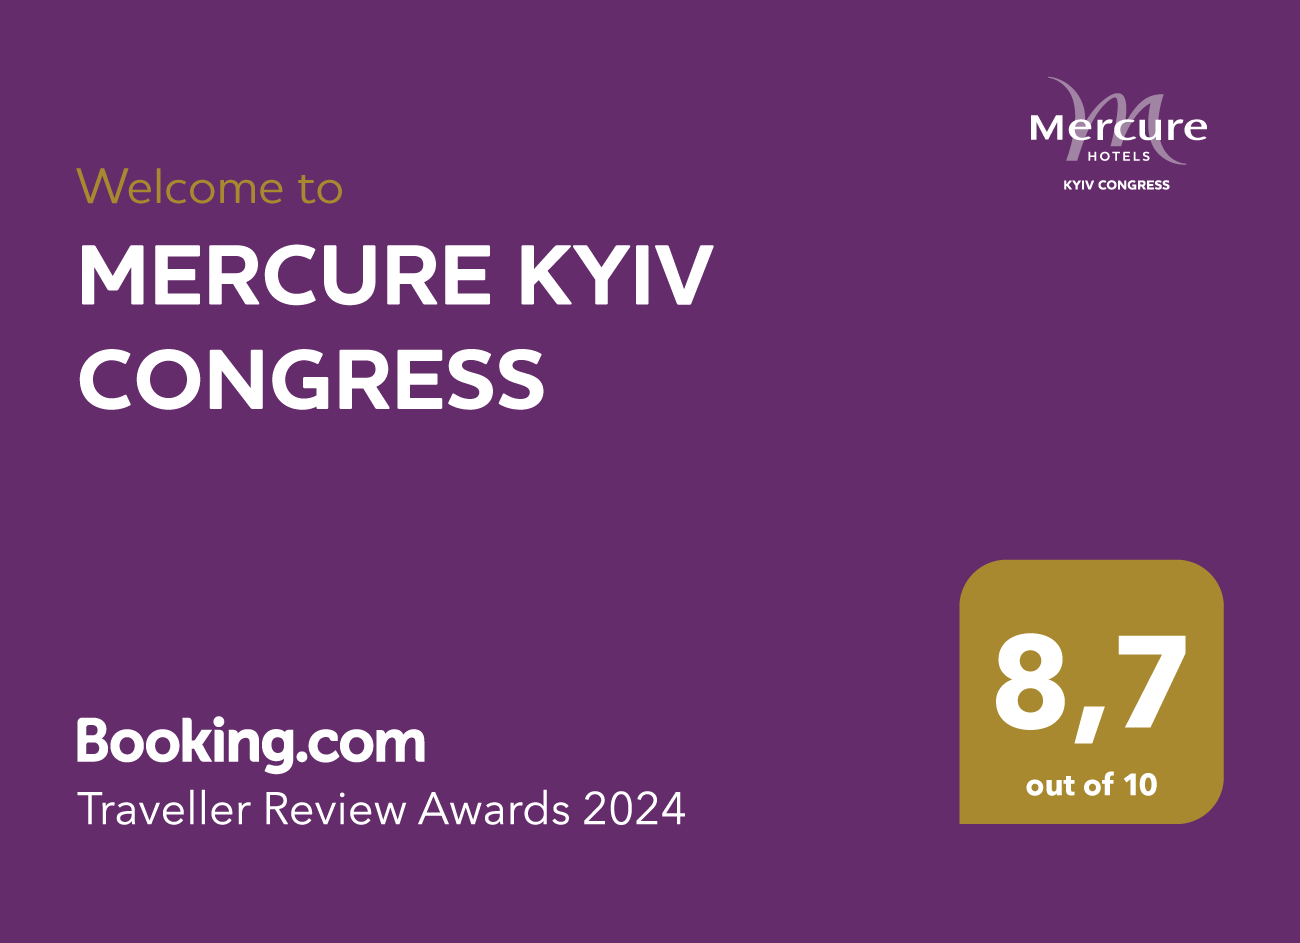 Mercure Kyiv Congress Hotel was higly marked by Booking.com